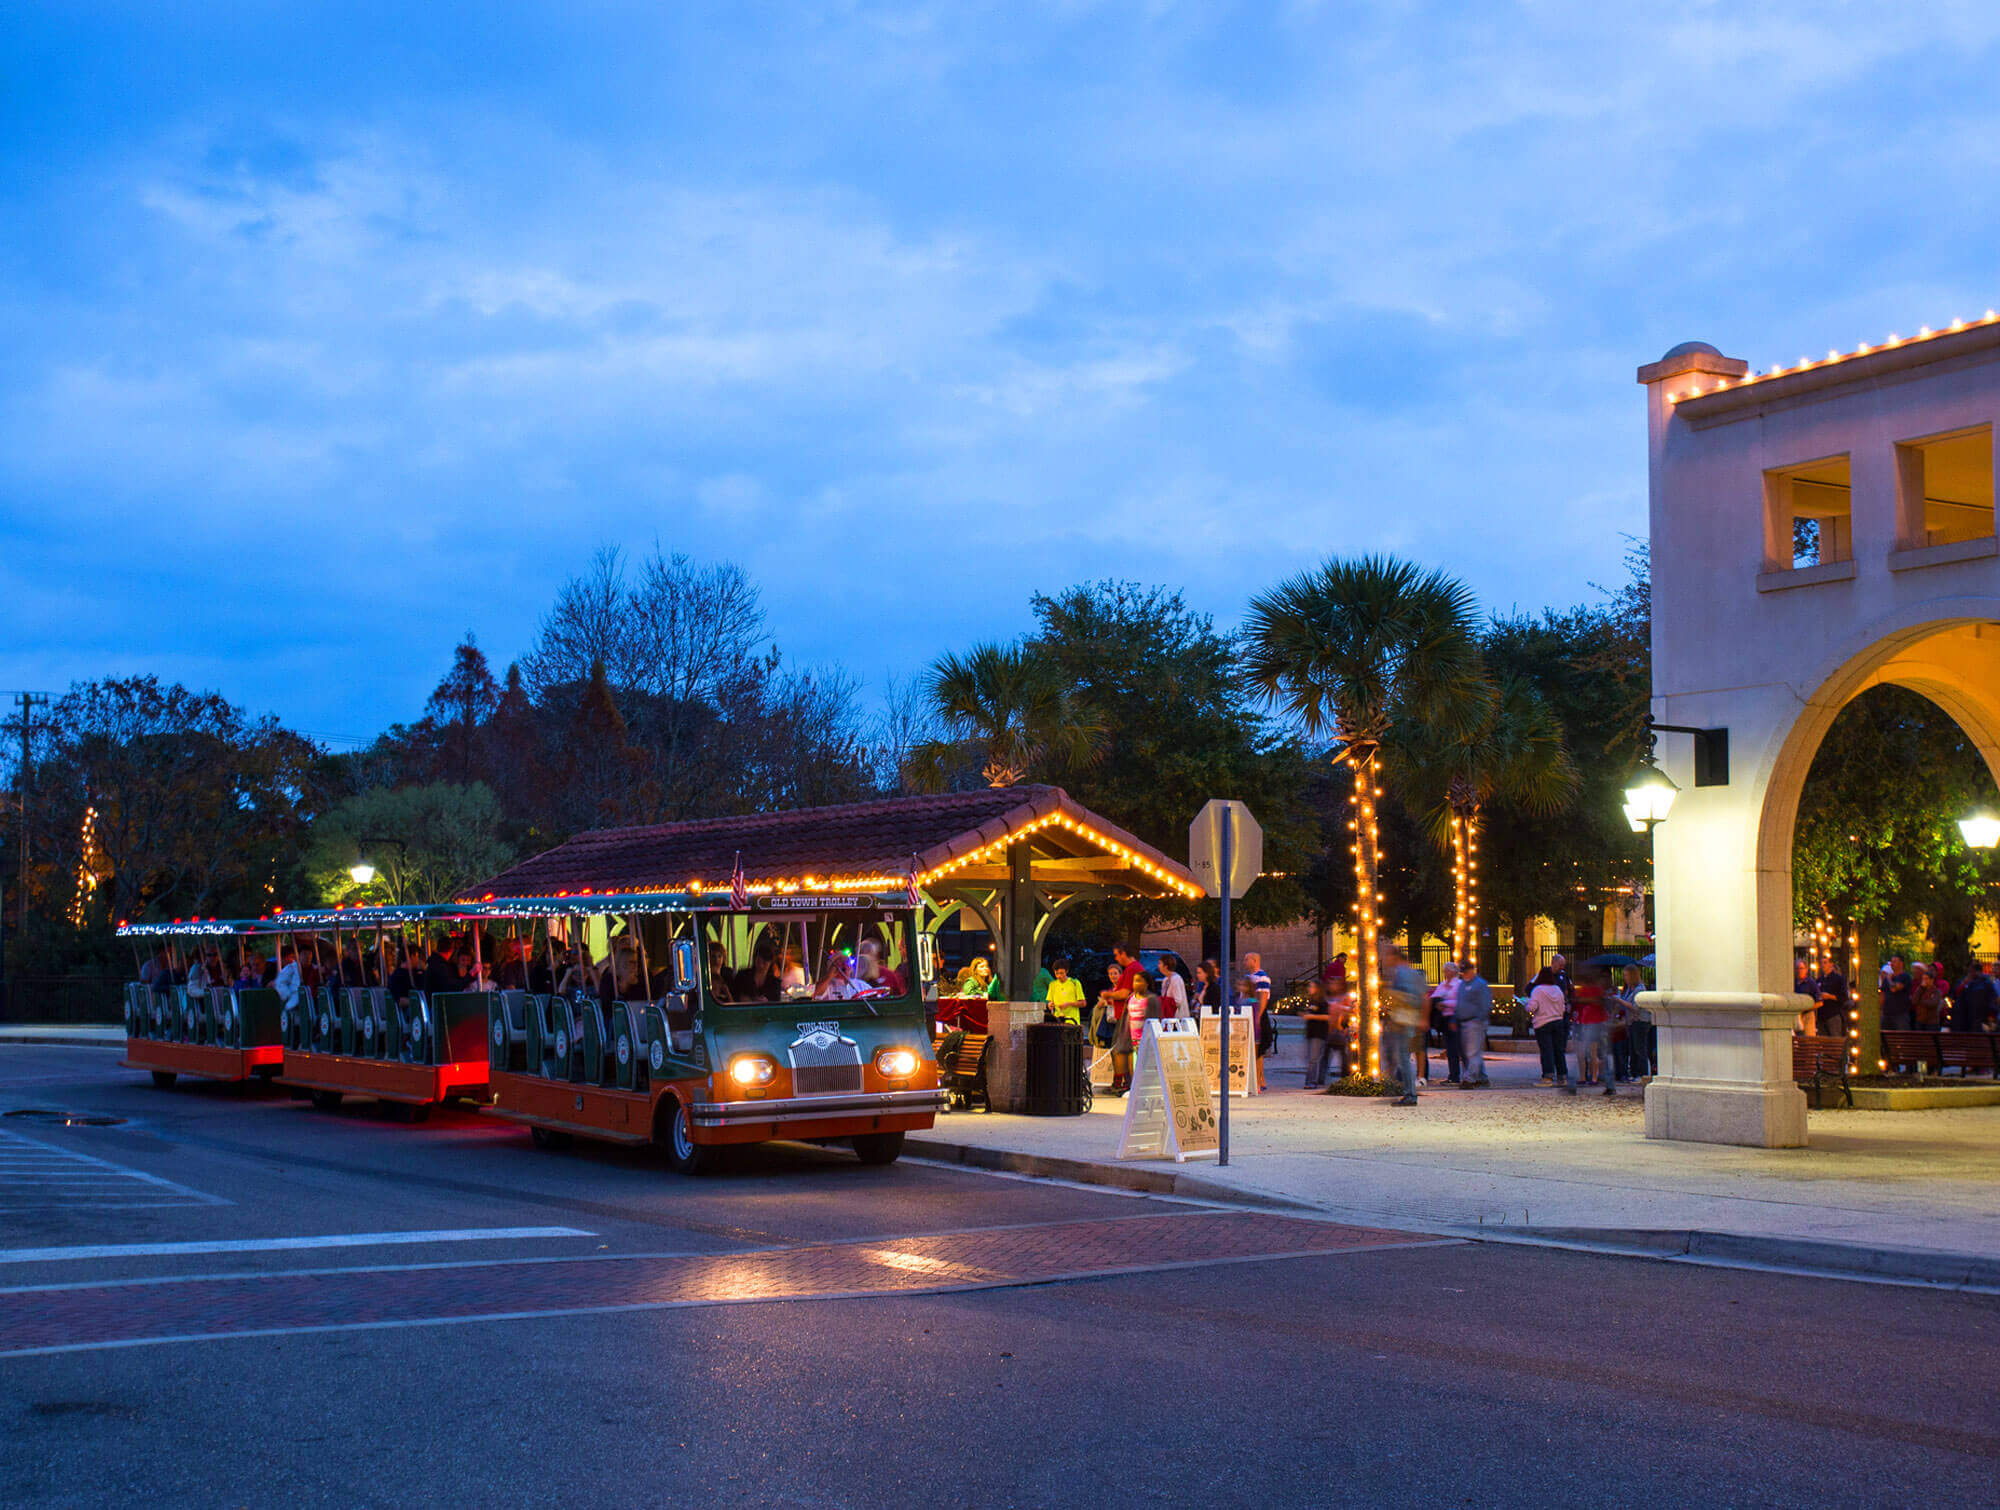 An Old Town Trolley decked out in Christmas lights riding by an outdoor plaza decorated for the holidays in St. Augustine, FL